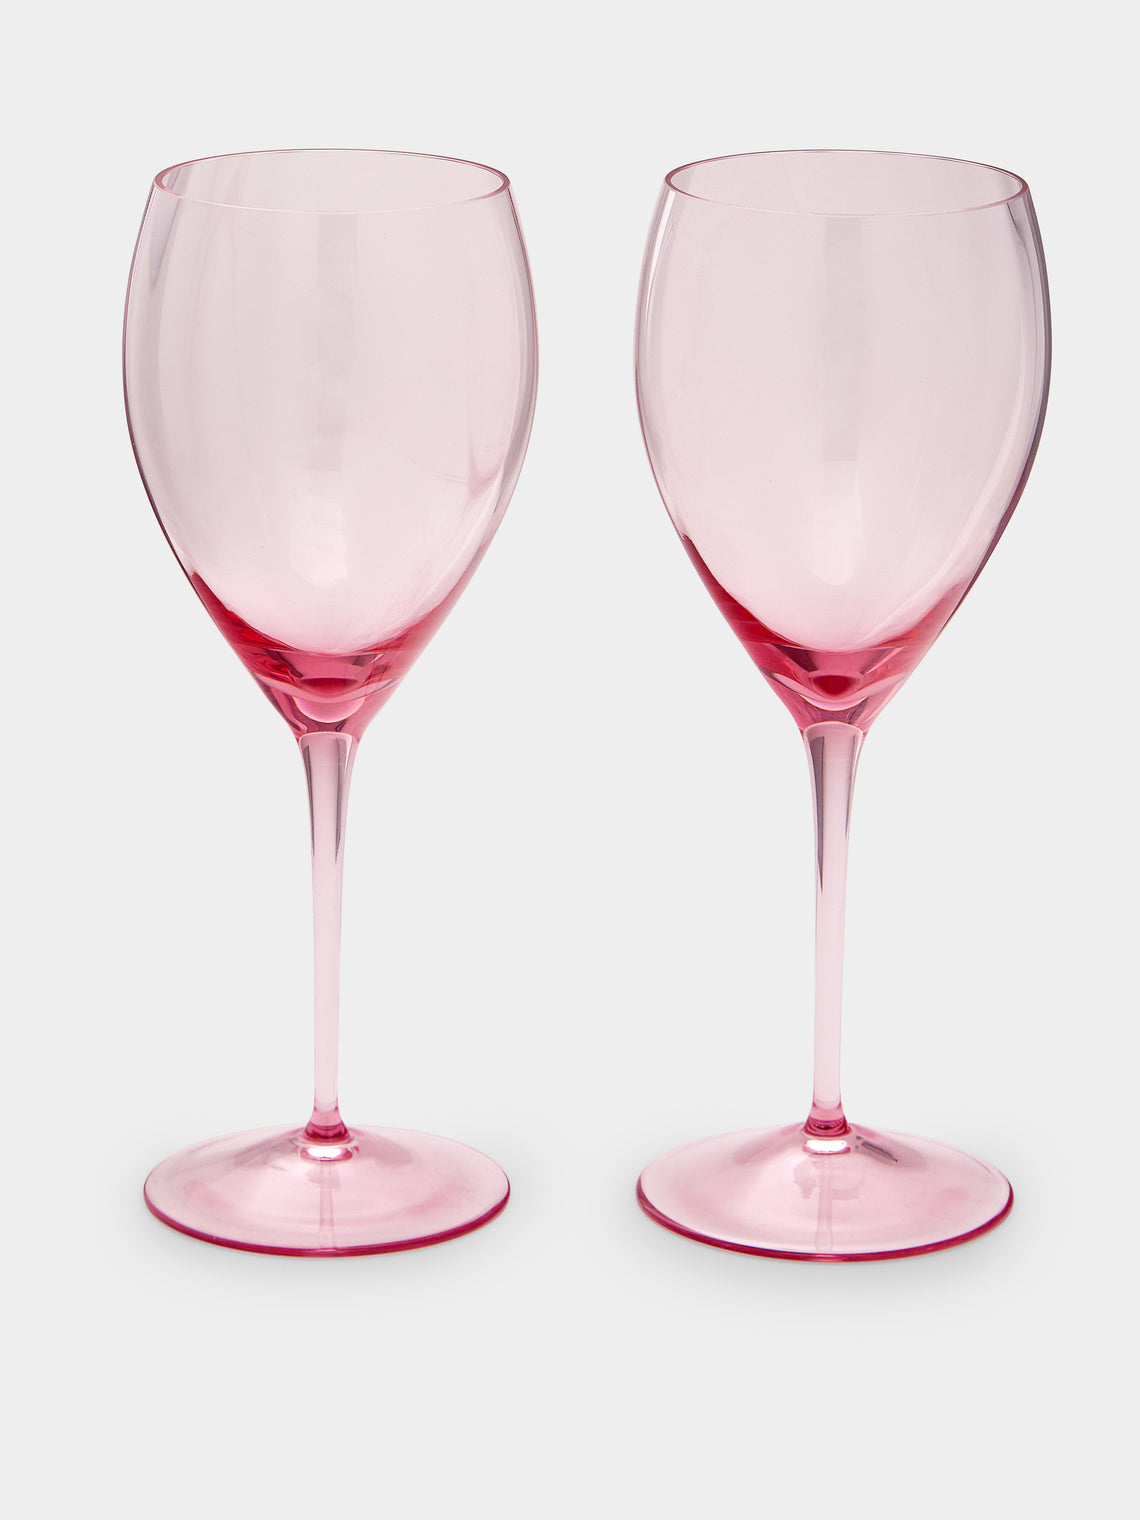 Moser - Optic Hand-Blown Crystal White Wine Glasses (Set of 2) - Pink - ABASK